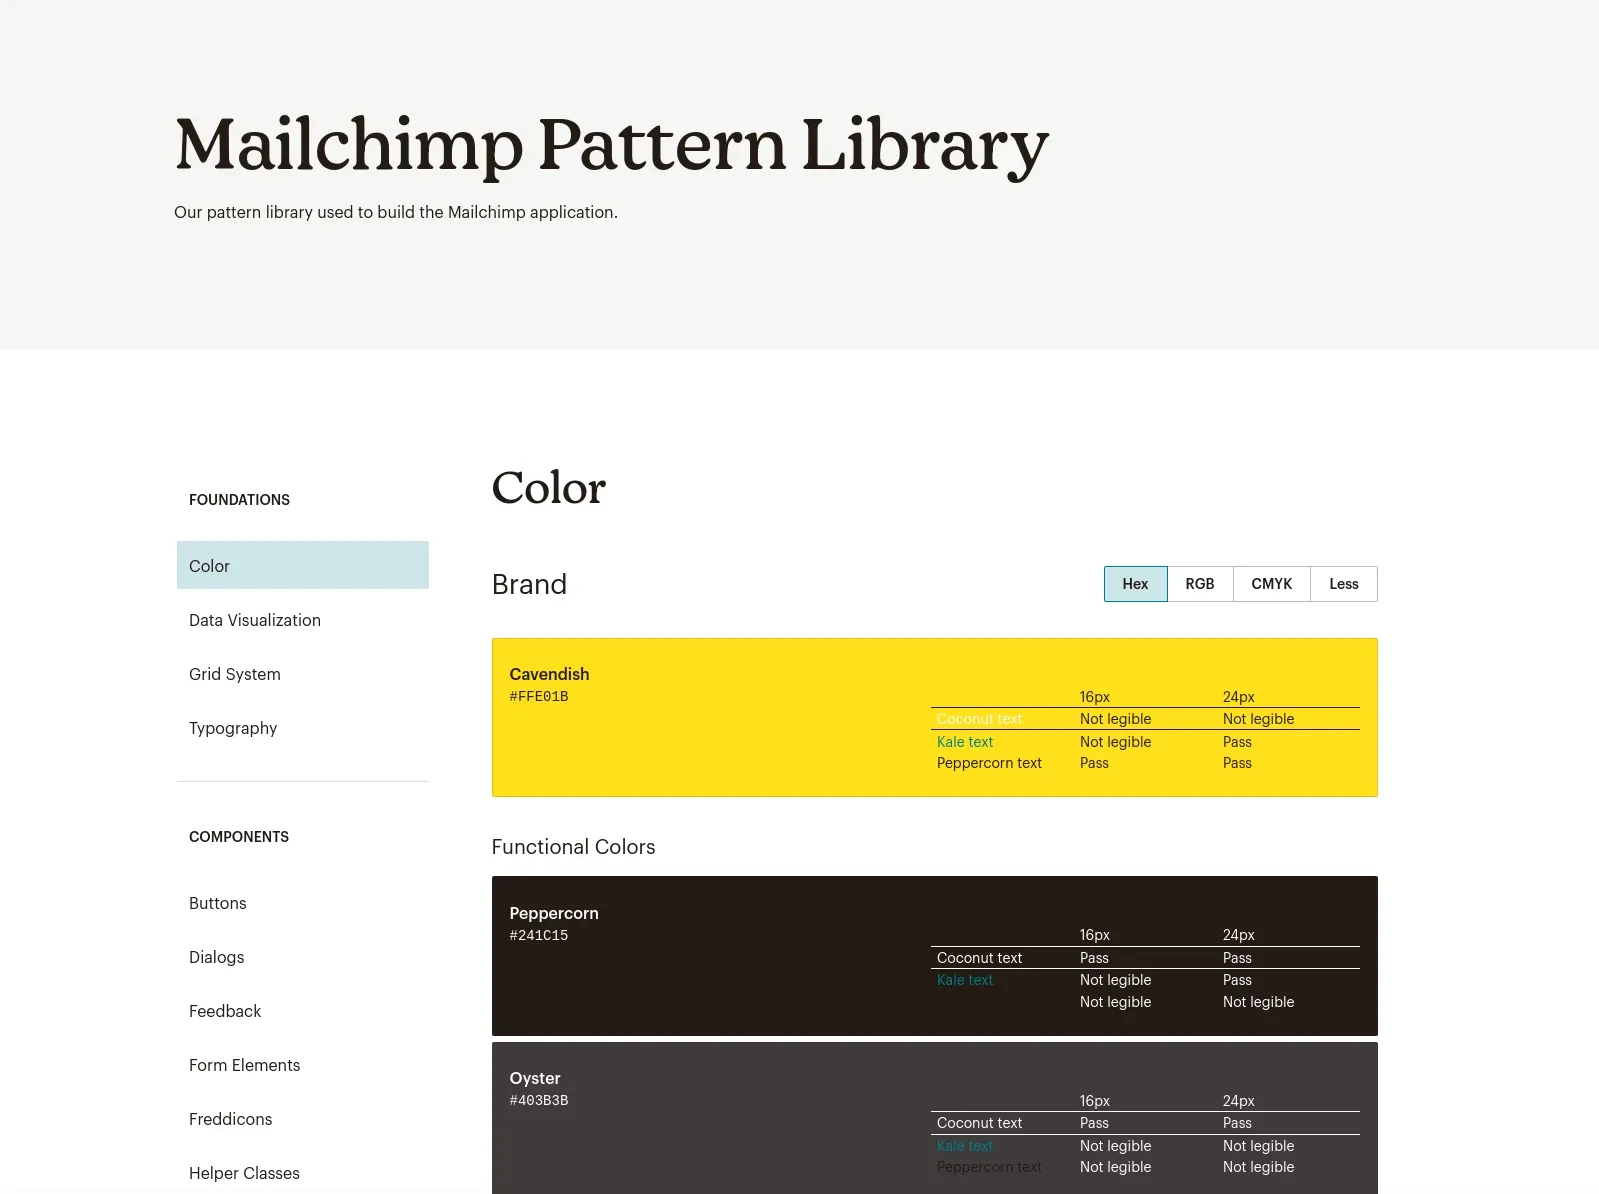 Example of a pattern library: Mailchimp 